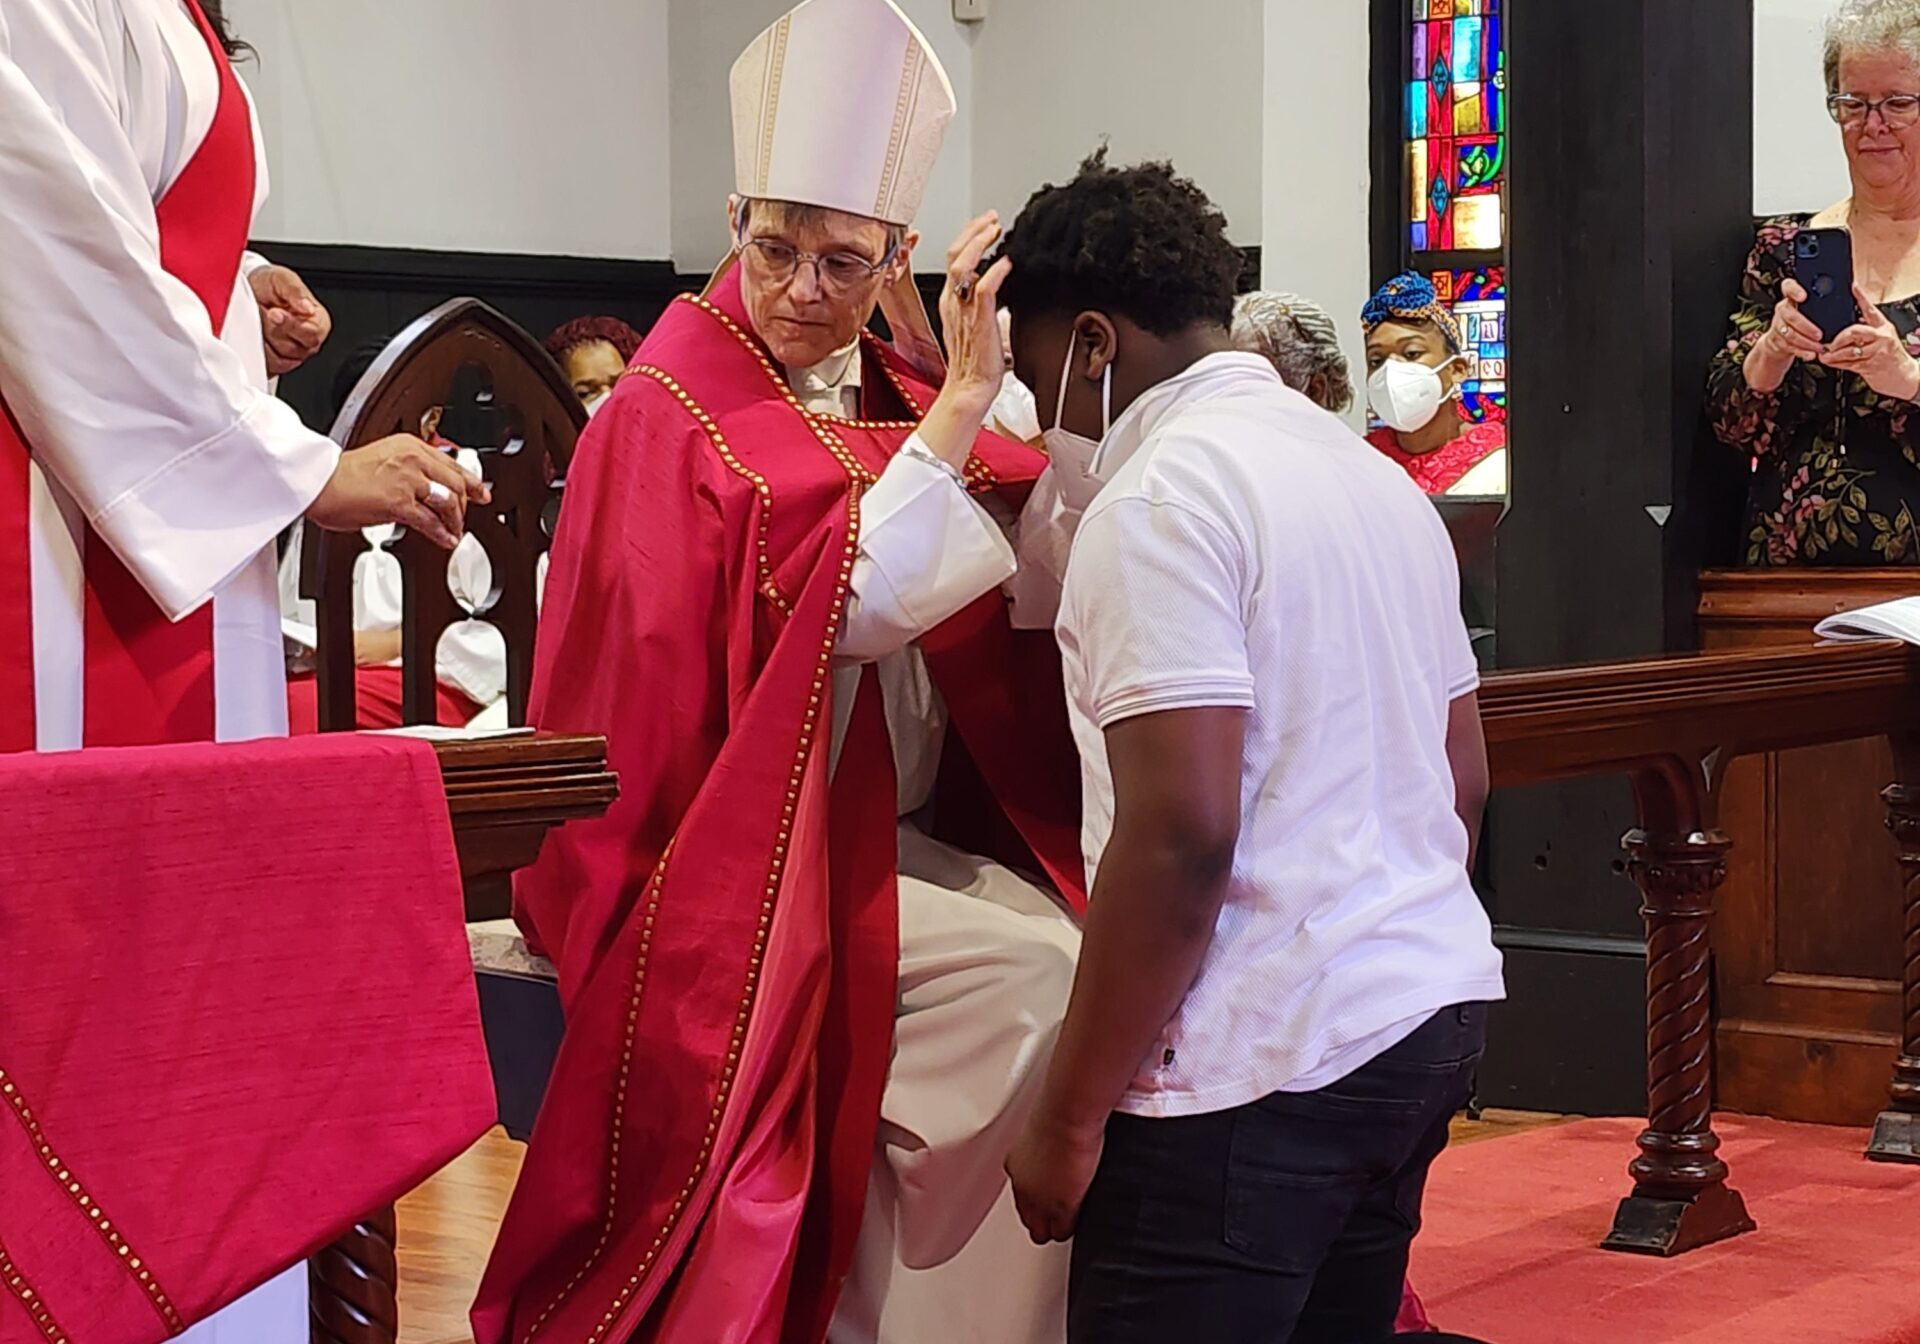 Kneeling youth for Confirmation